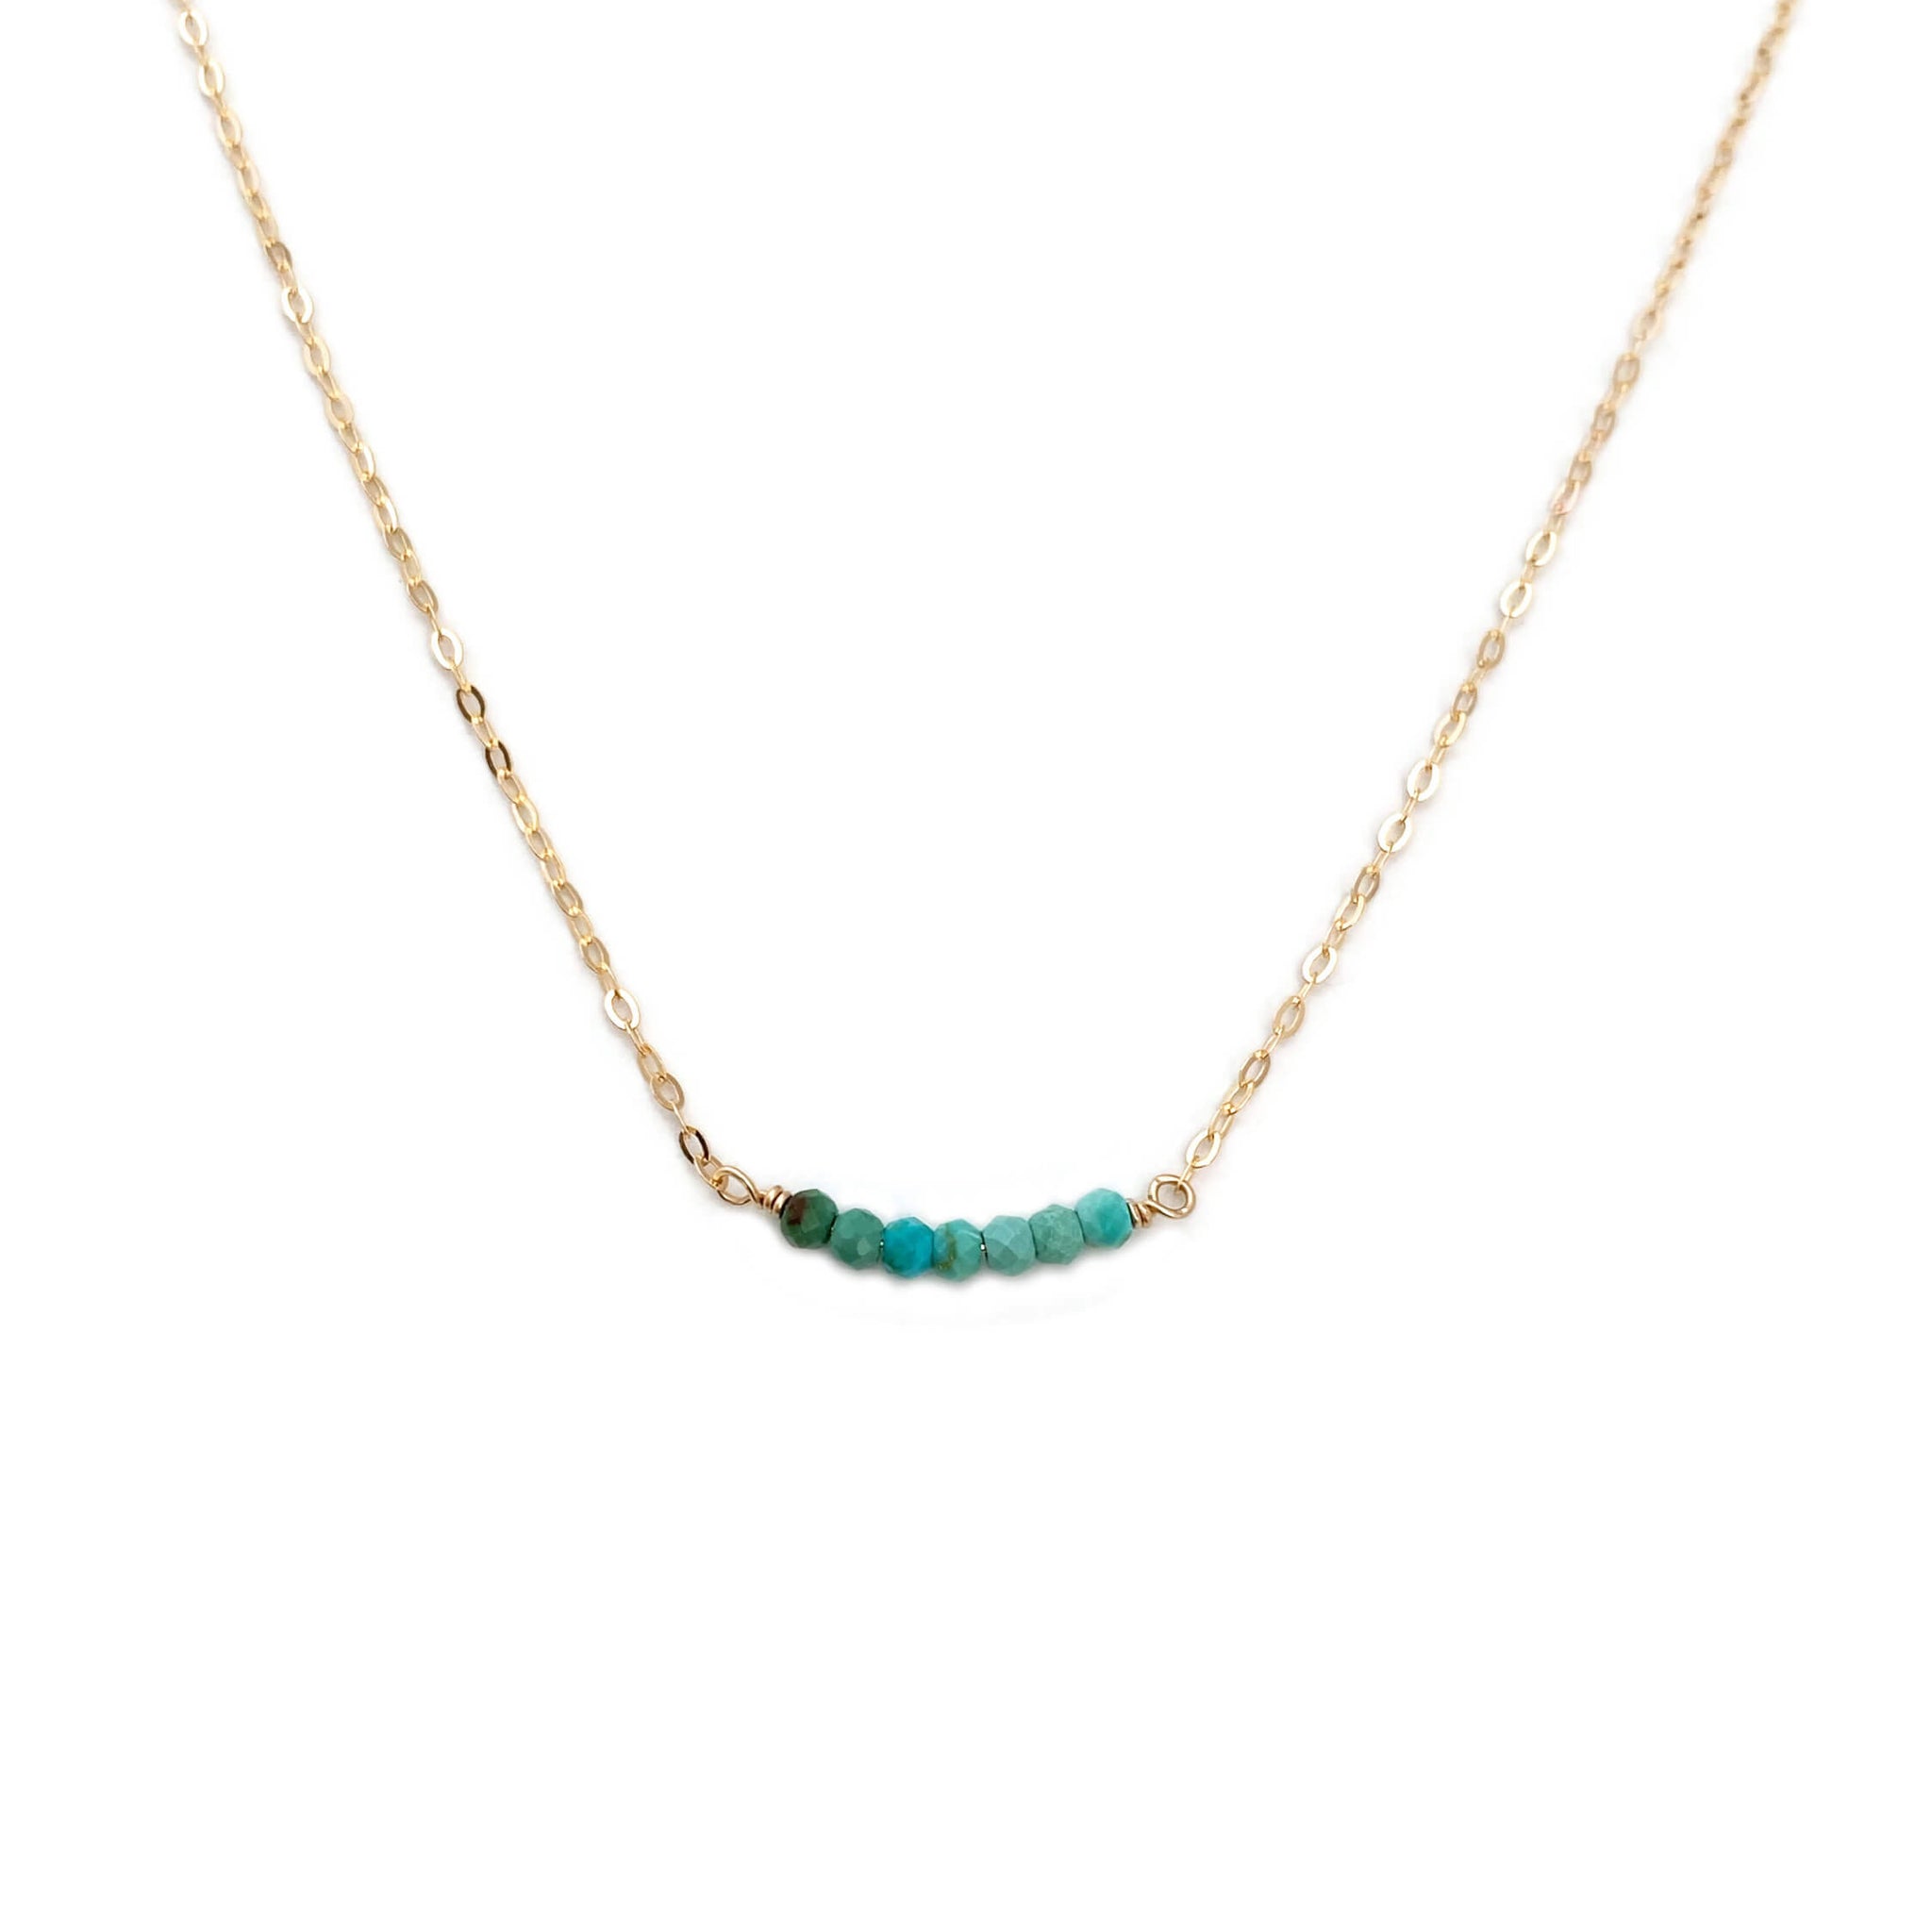 This dainty real turquoise necklace is made of ombre real turquoise beads from Mexico and 14k gold chain.  It can be also made in gold filled or sterling silver chain.